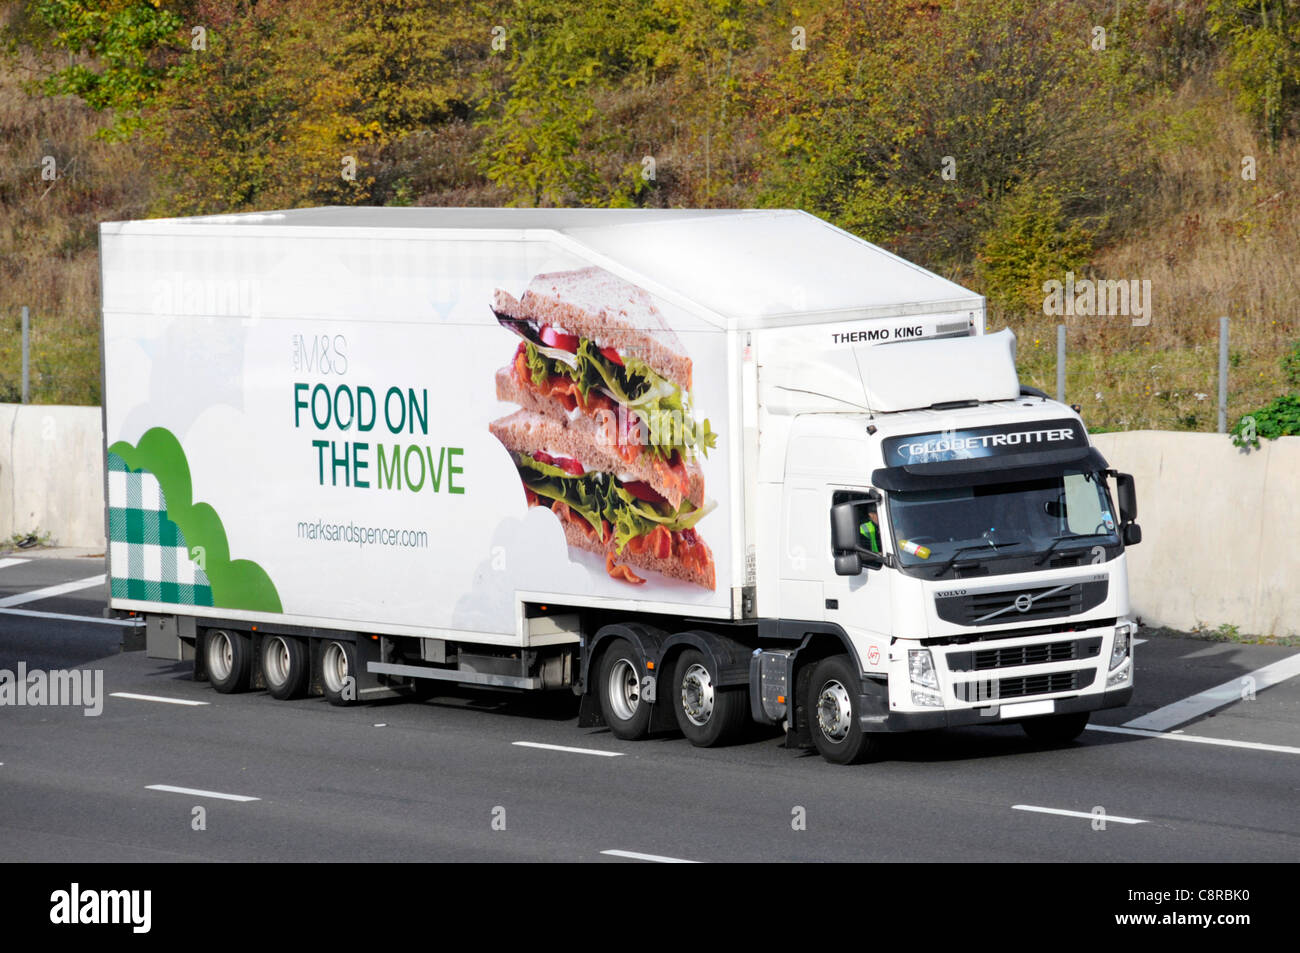 M&S food delivery supply chain articulated trailer elaborate graphics advertising food on the move and Volvo hgv lorry truck driving on UK motorway Stock Photo